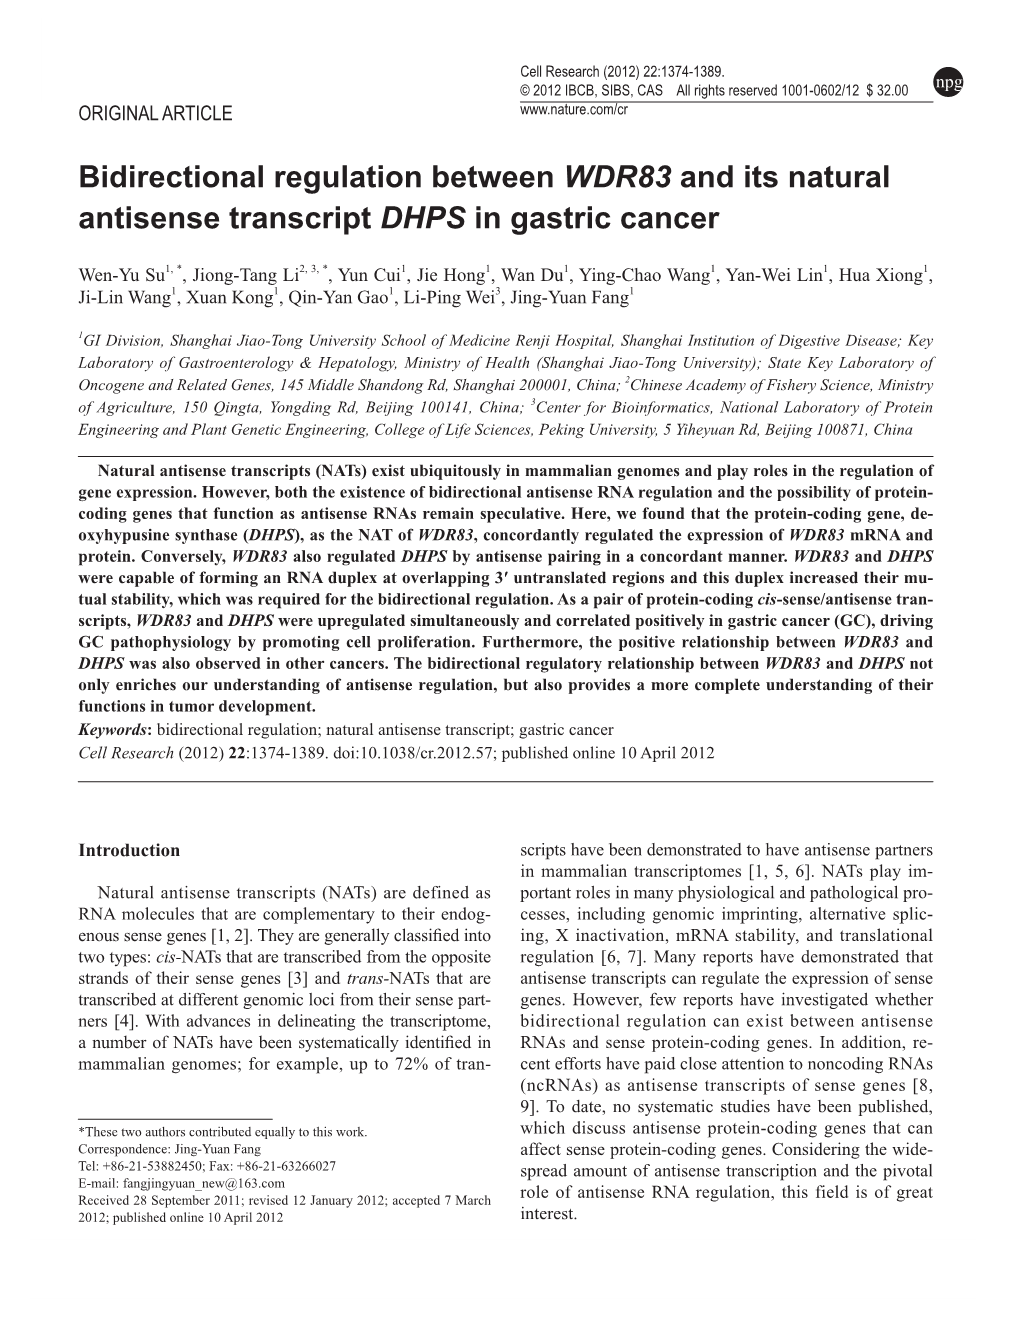 Bidirectional Regulation Between WDR83 and Its Natural Antisense Transcript DHPS in Gastric Cancer